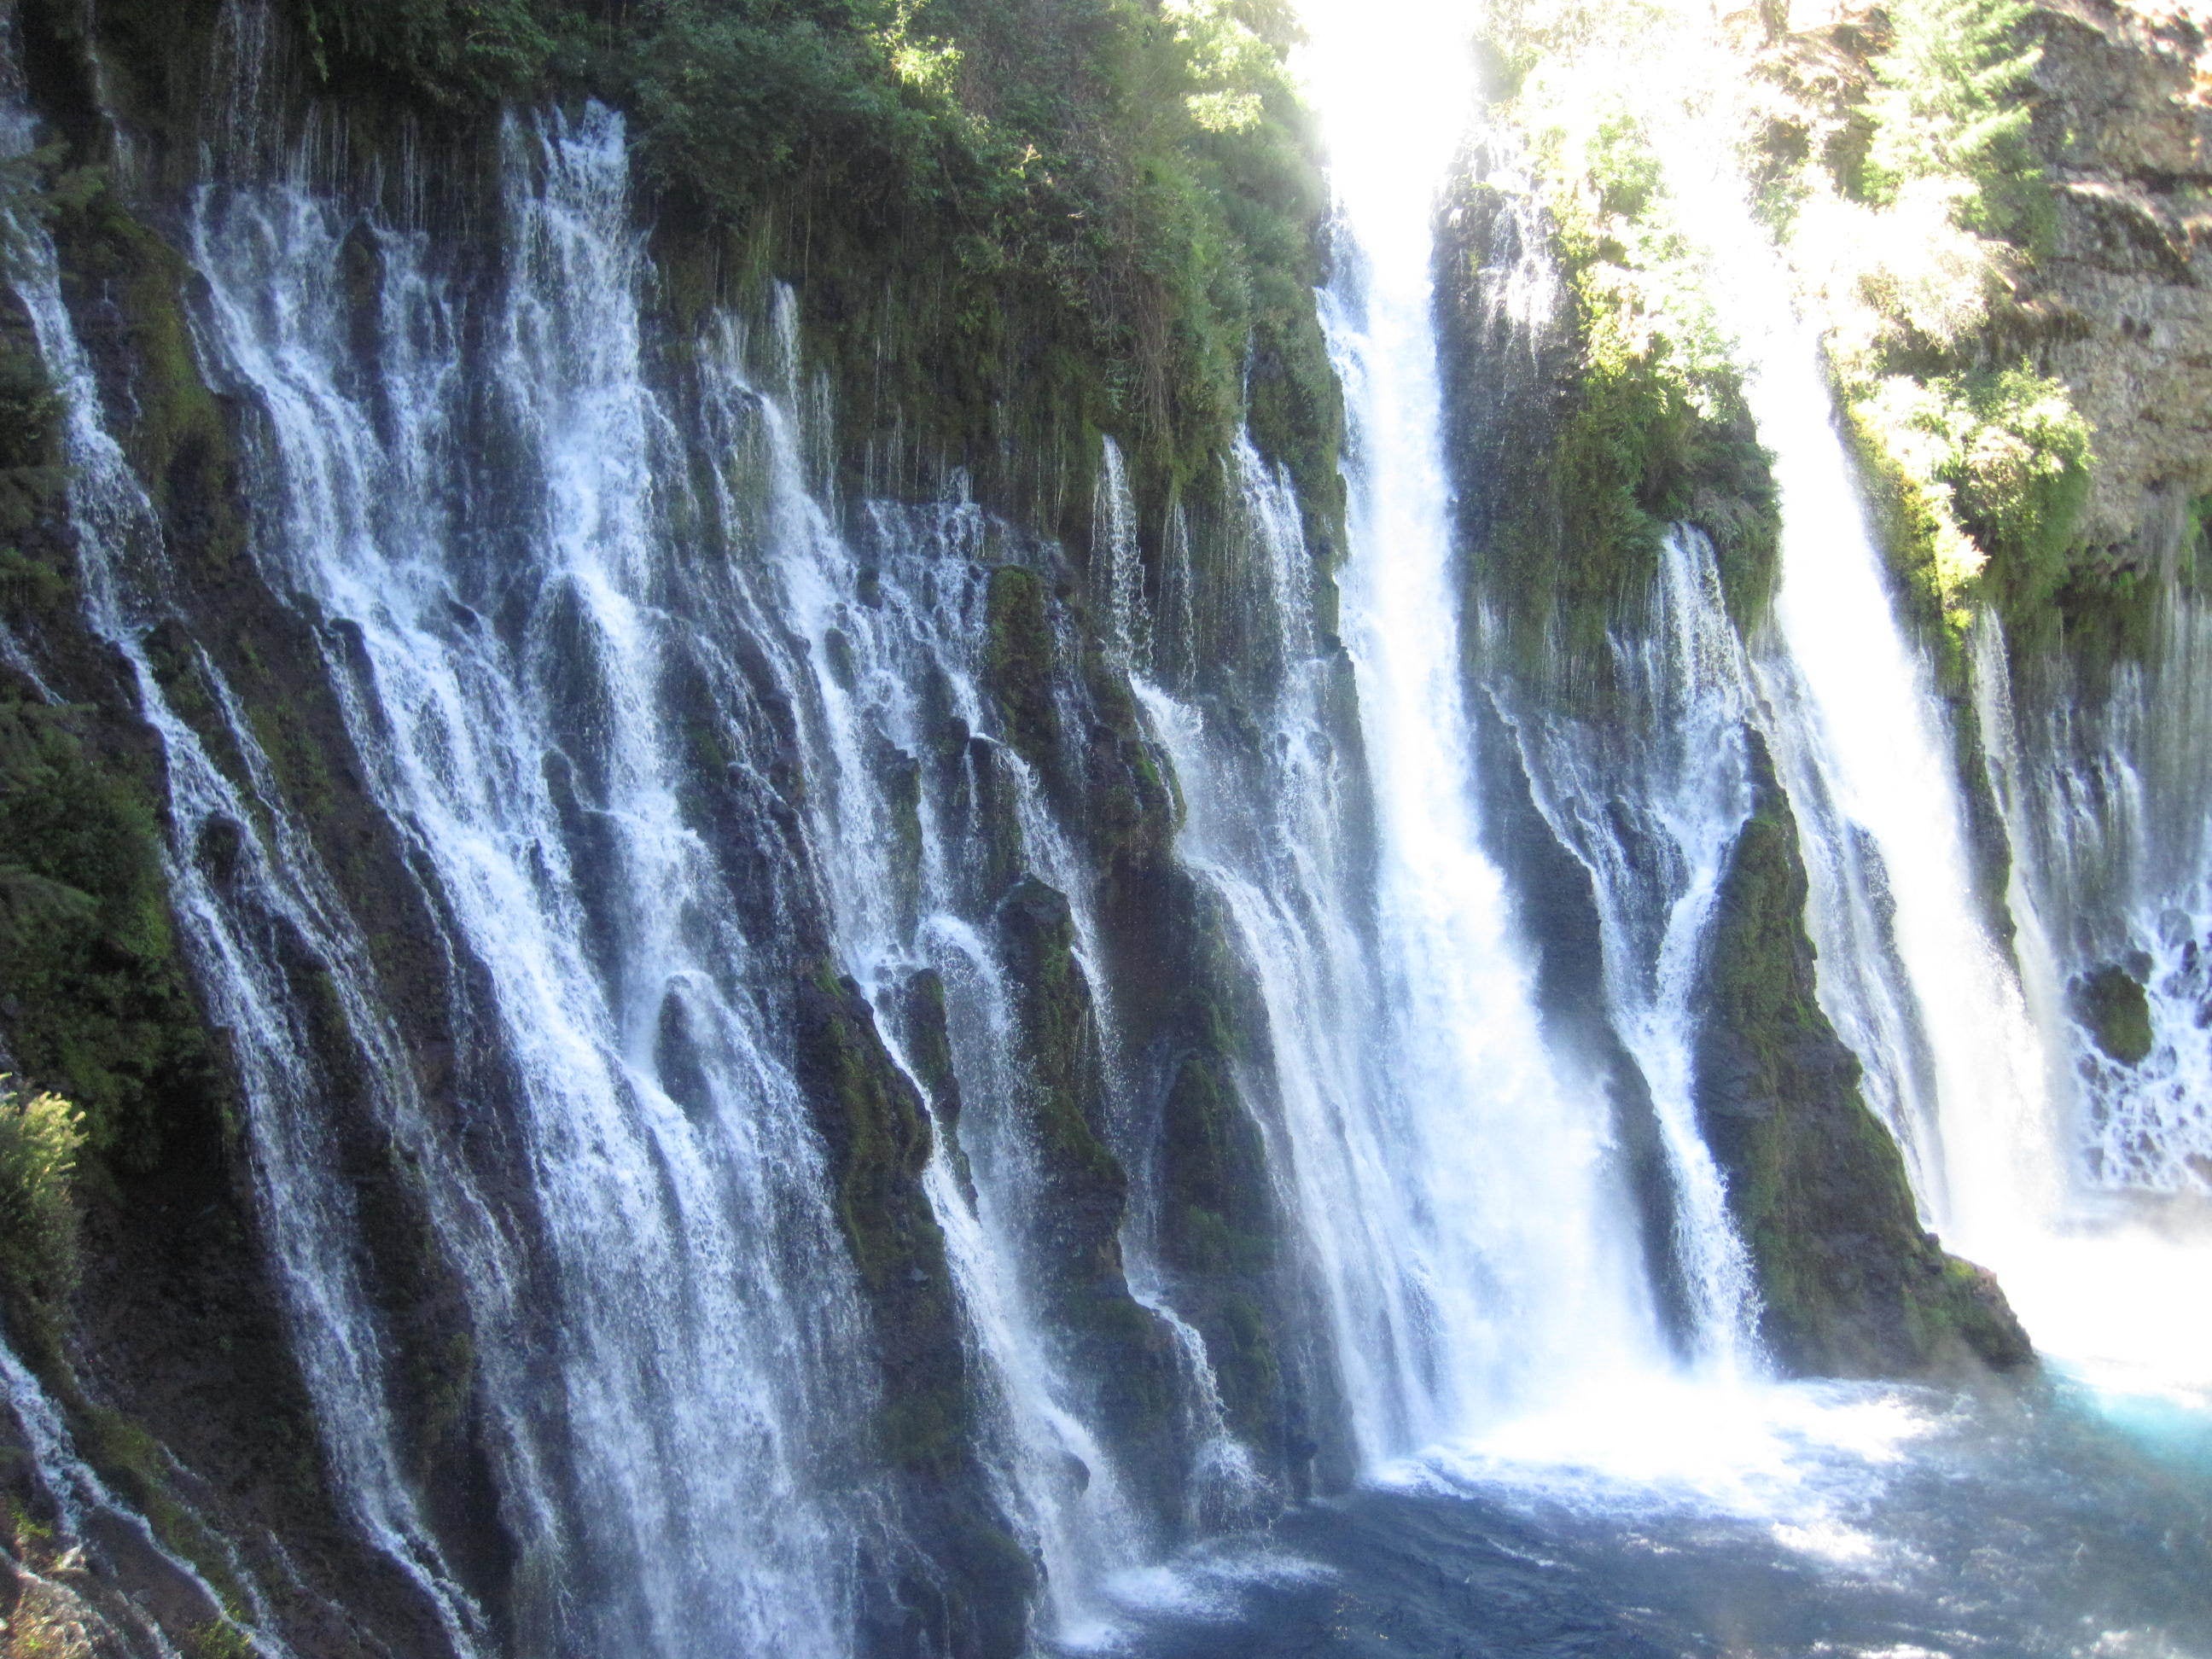 Camper submitted image from McArthur-Burney Falls Memorial State Park - 2